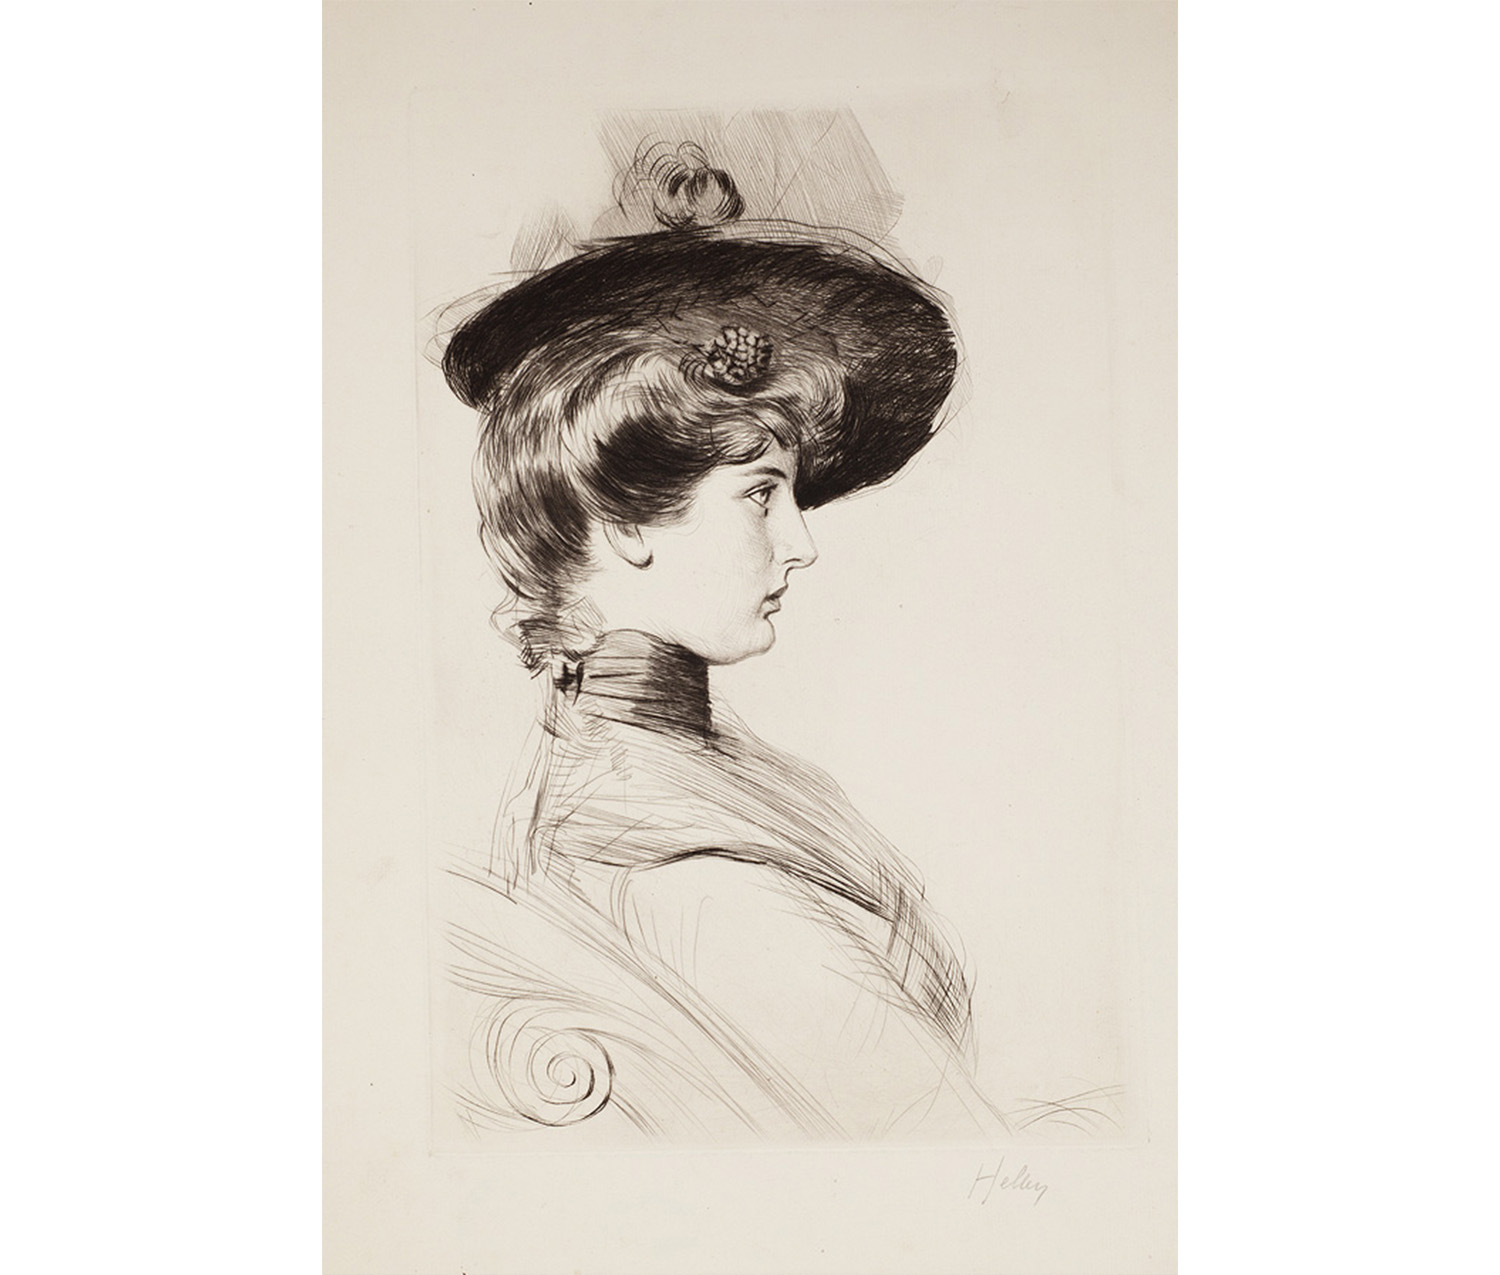 profile view of a woman wearing dress with high collar, hair in an updo, and large hat with a bow